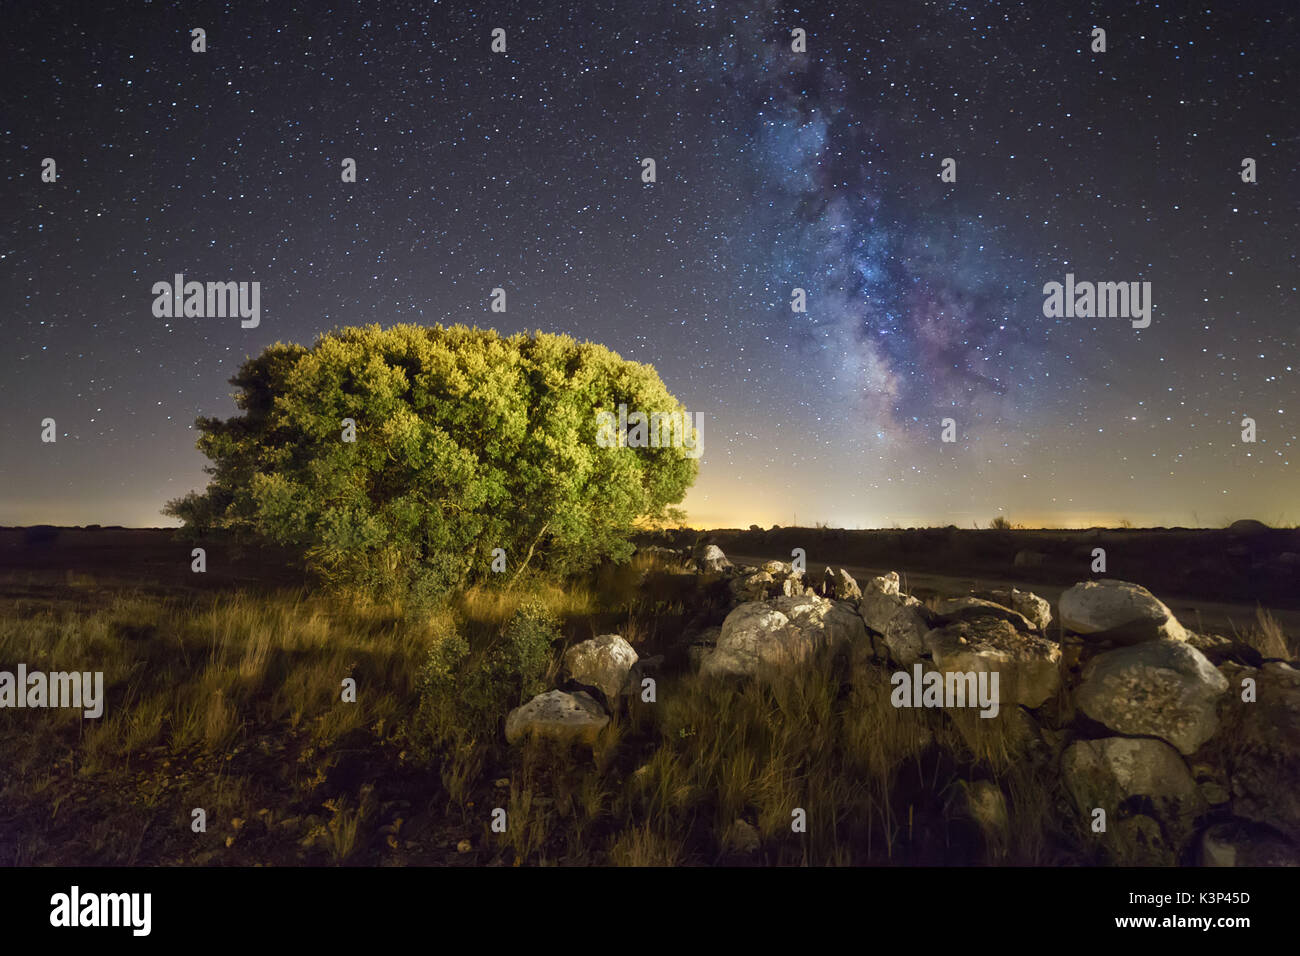 Holm oak and the Milky Way Stock Photo